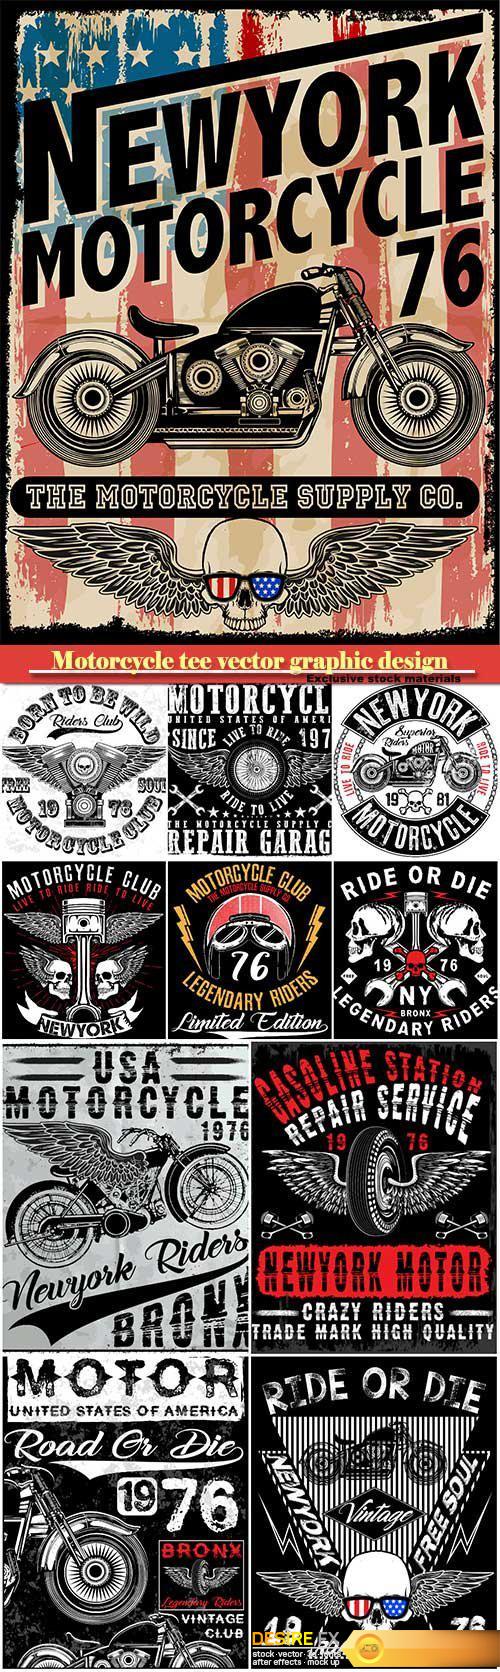 Motorcycle tee vector graphic design, motorcycle label t-shirt design with illustration